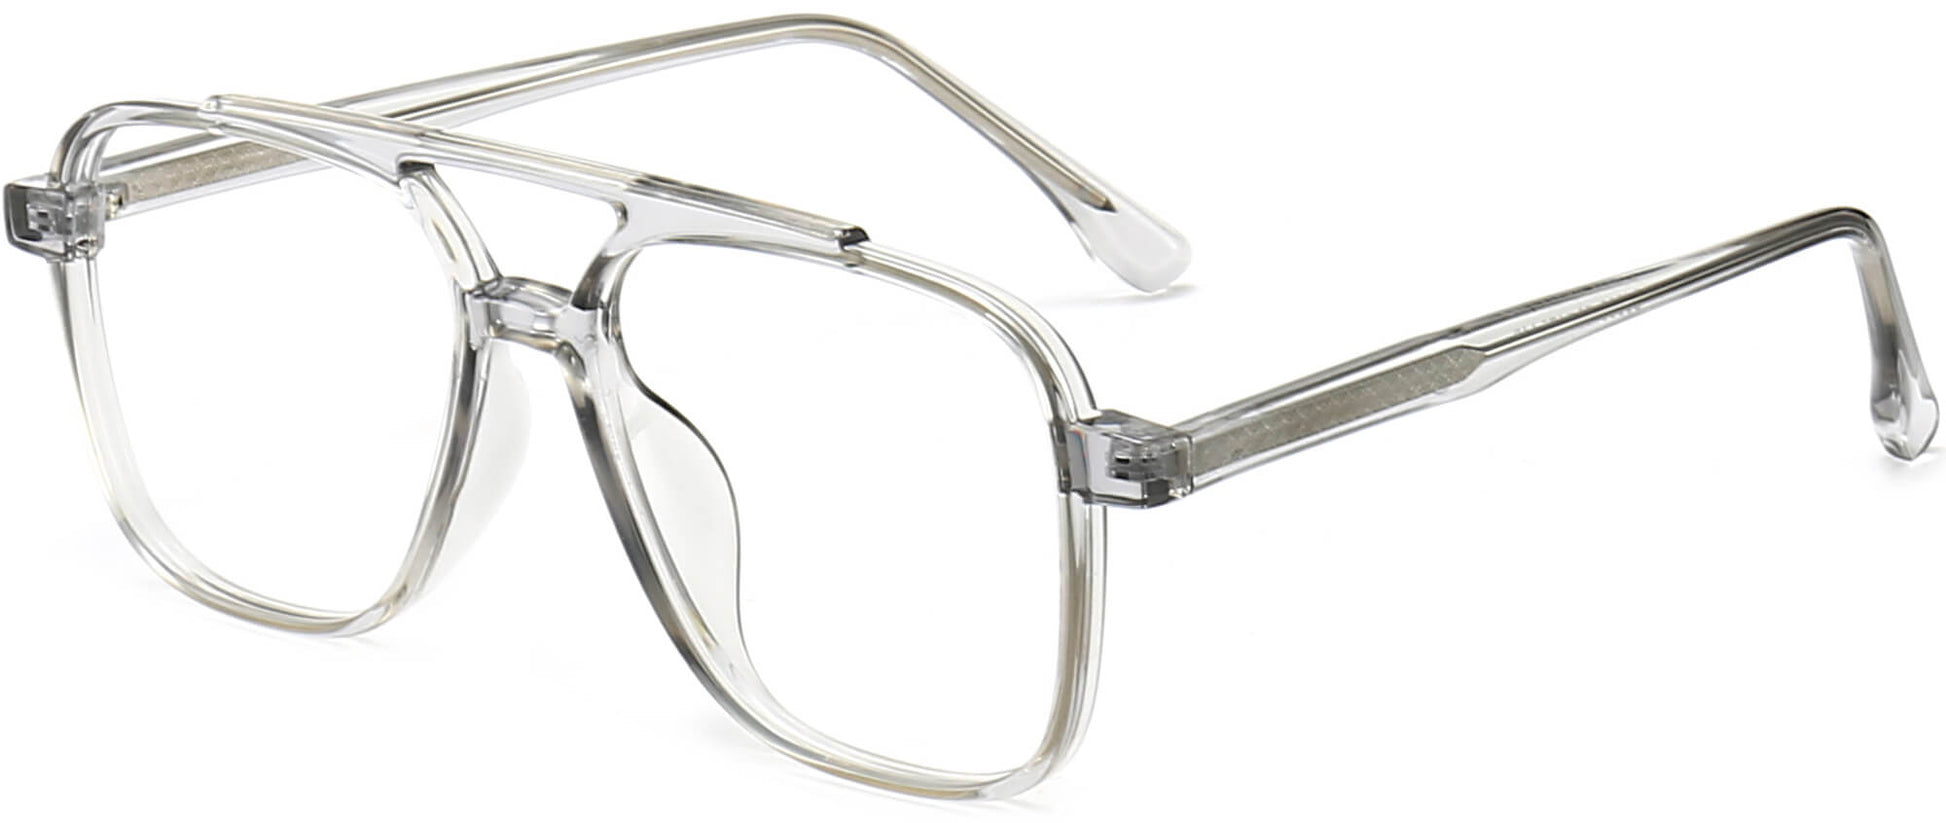 Jamir Square Gray Eyeglasses from ANRRI, angle view